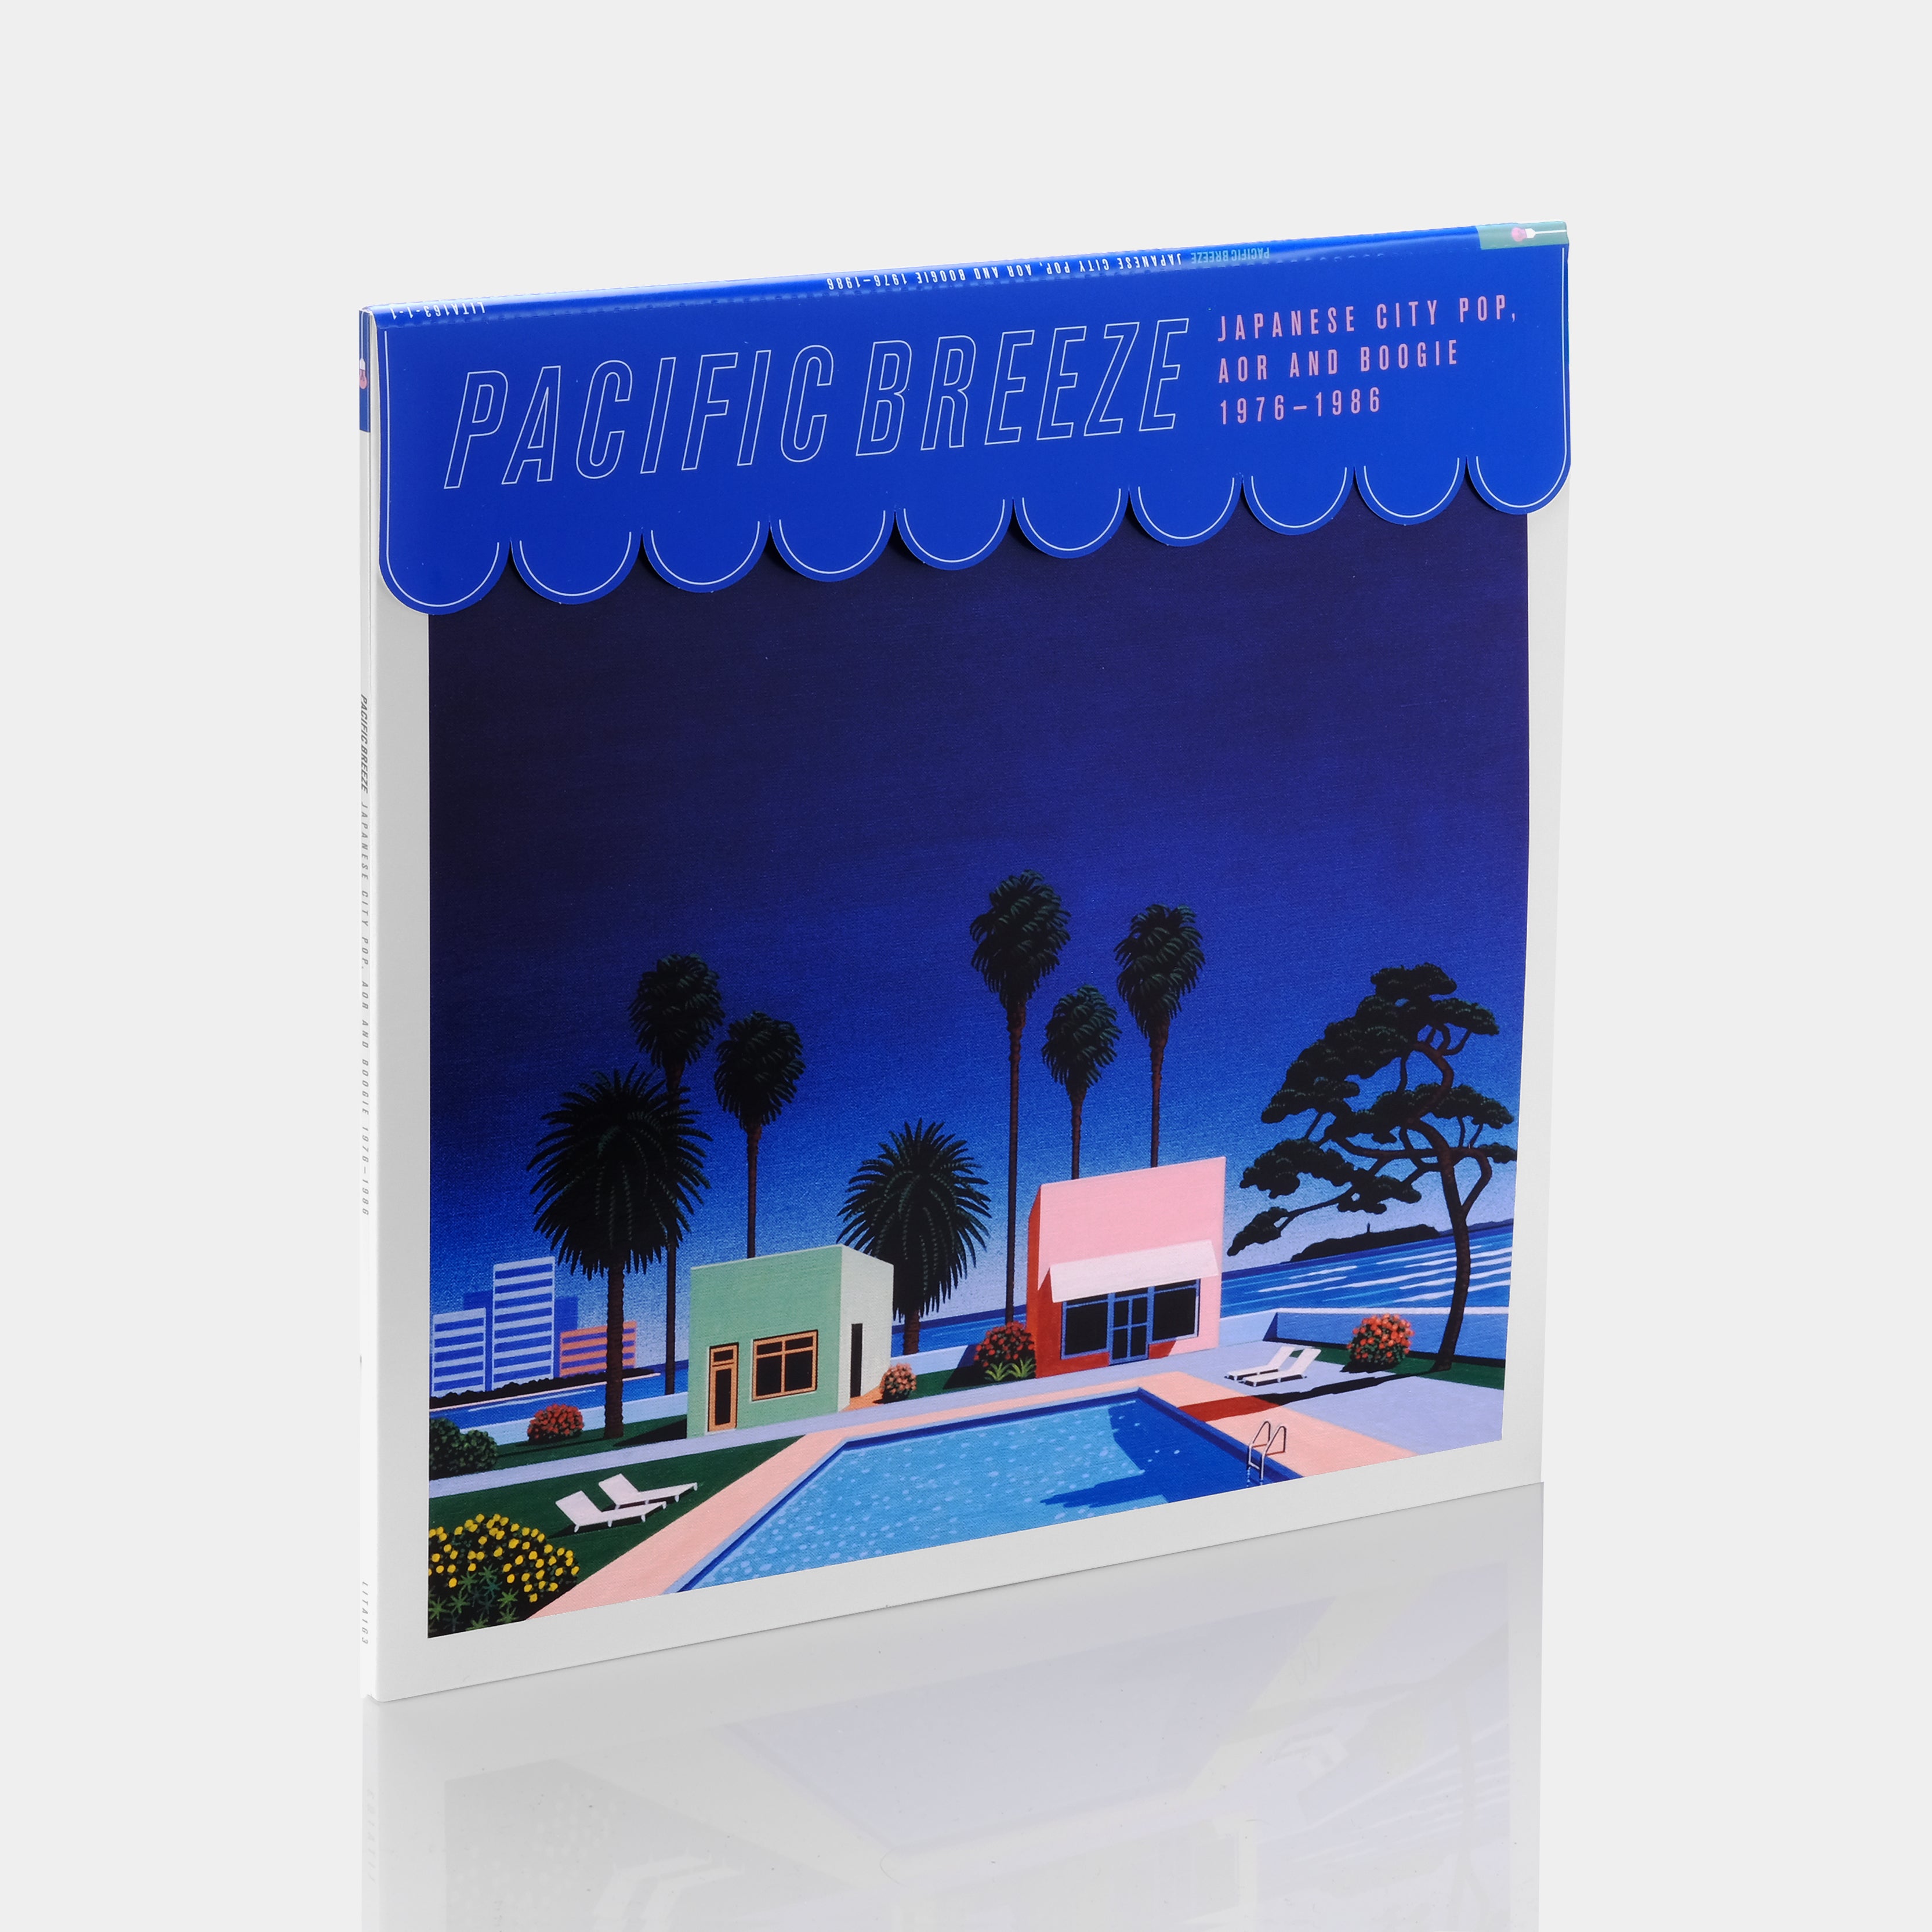 Pacific Breeze - Japanese City Pop, AOR And Boogie 1976-1986 2xLP Tricolor Vinyl Record